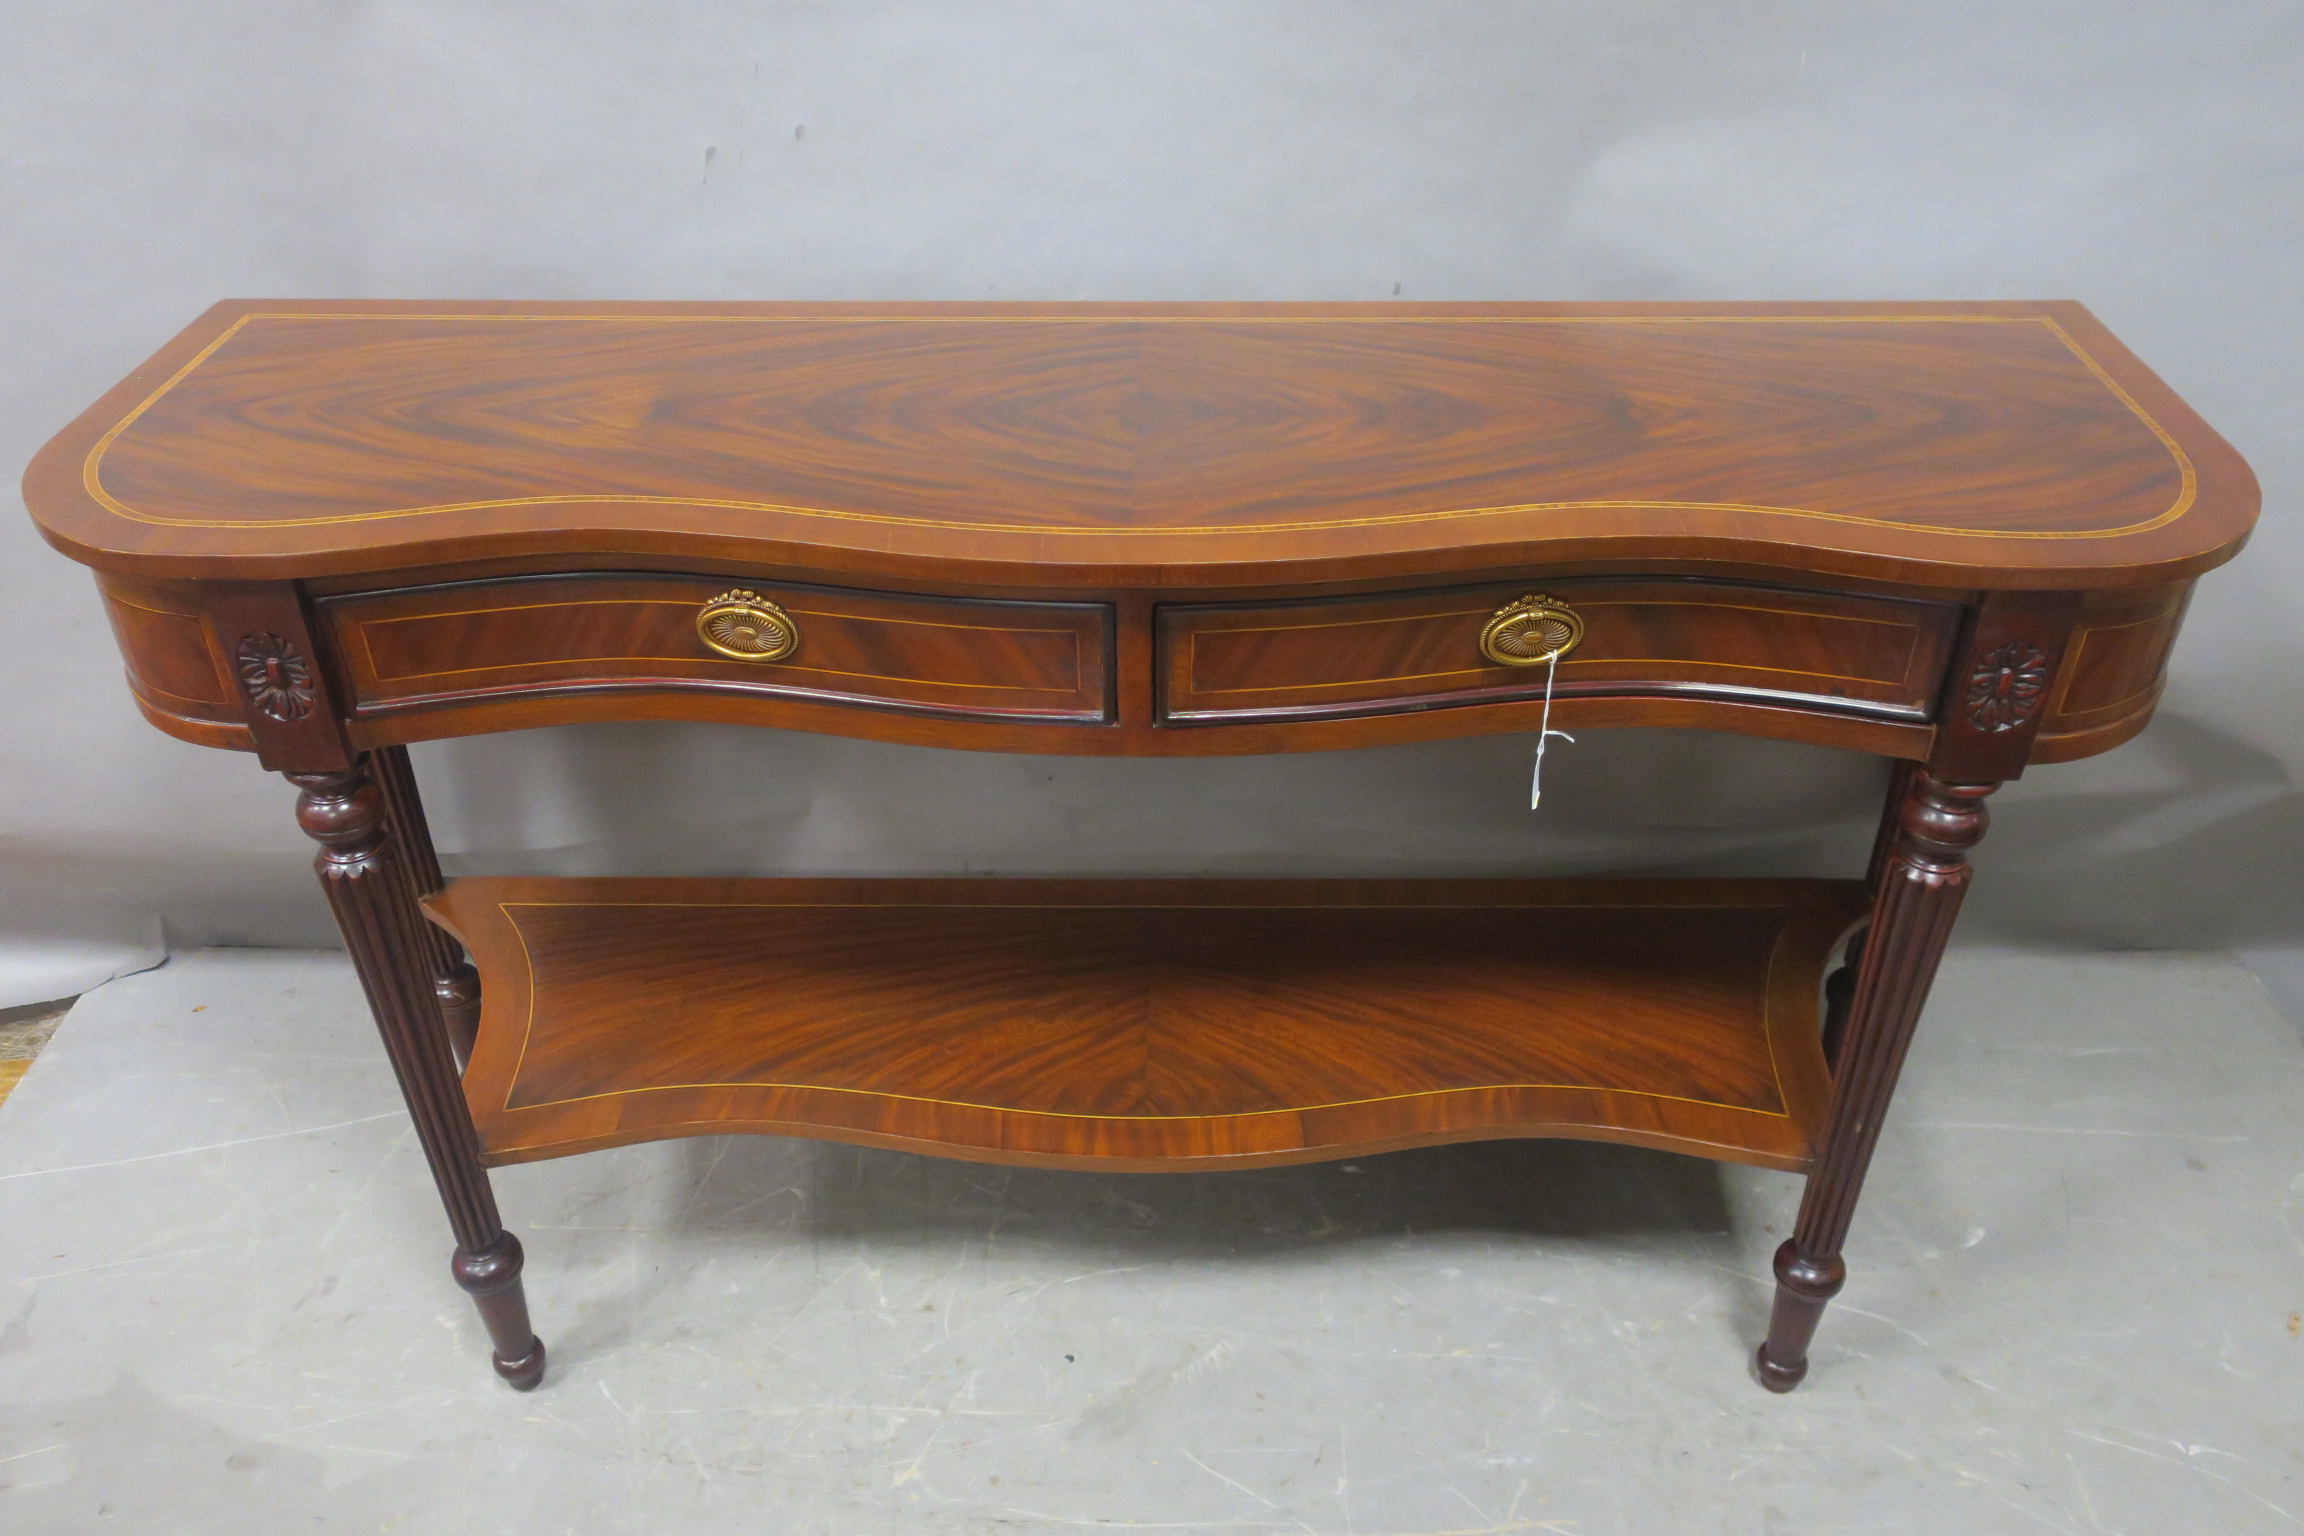 A FINE REGENCY DESIGN MAHOGANY AND KINGWOOD INLAID SIDE TABLE,